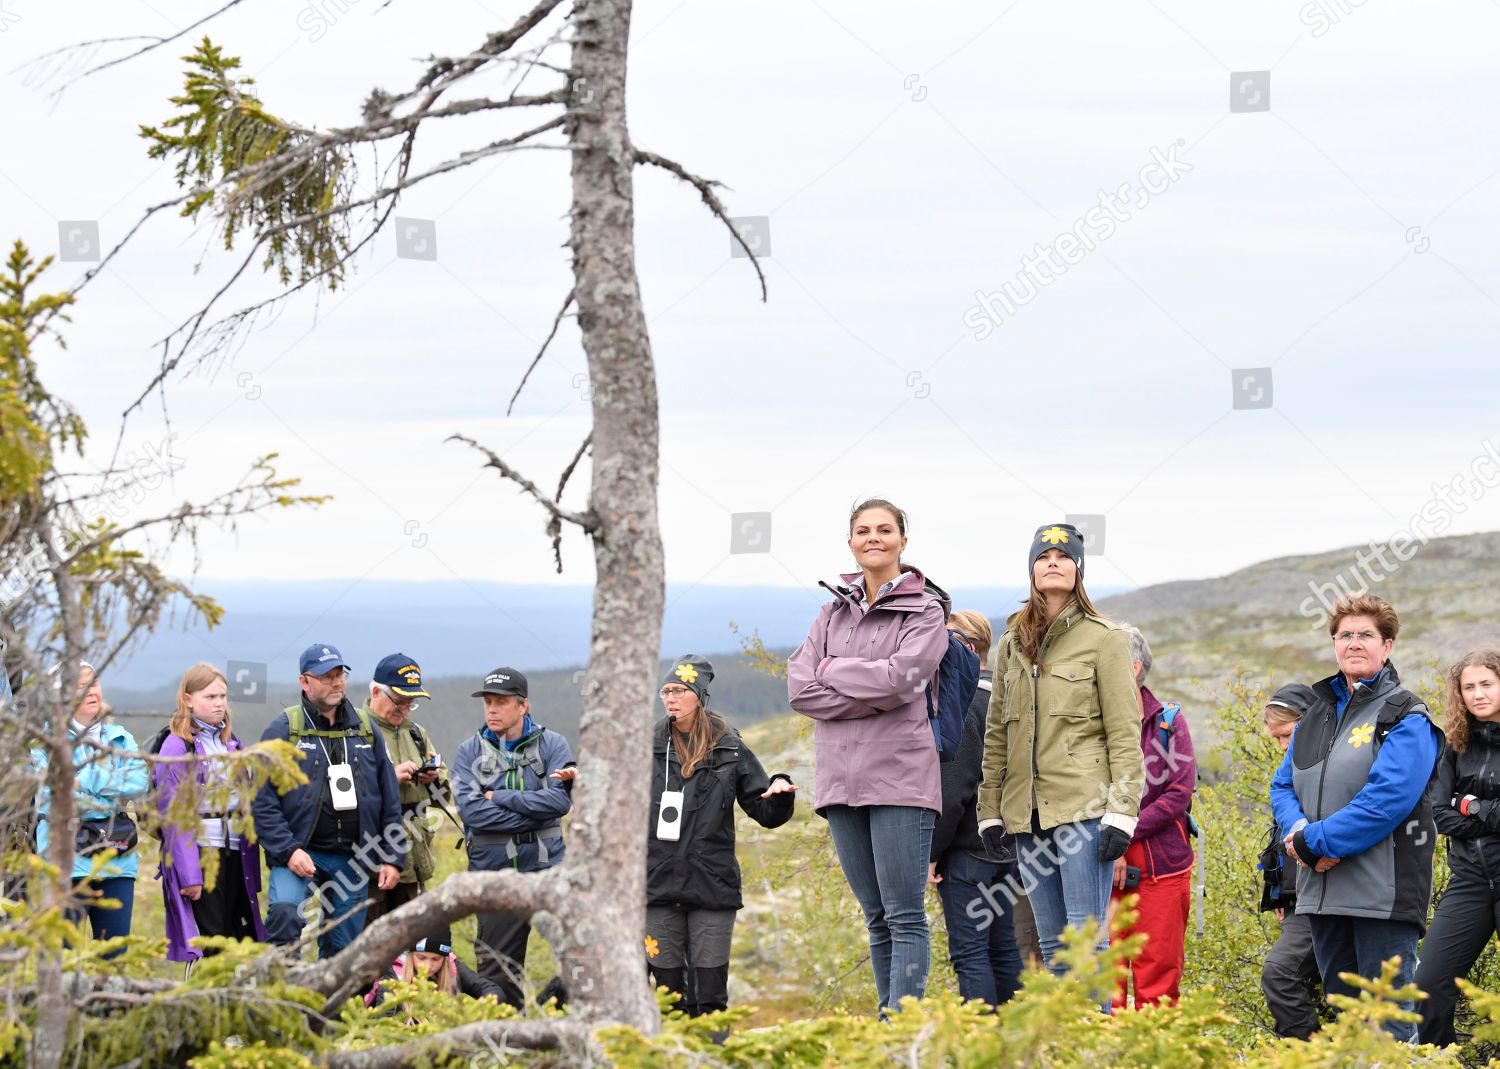 crown-princess-victoria-and-princess-sofia-of-sweden-during-victorias-last-province-walk-dalarna-county-sweden-shutterstock-editorial-10303164m.jpg